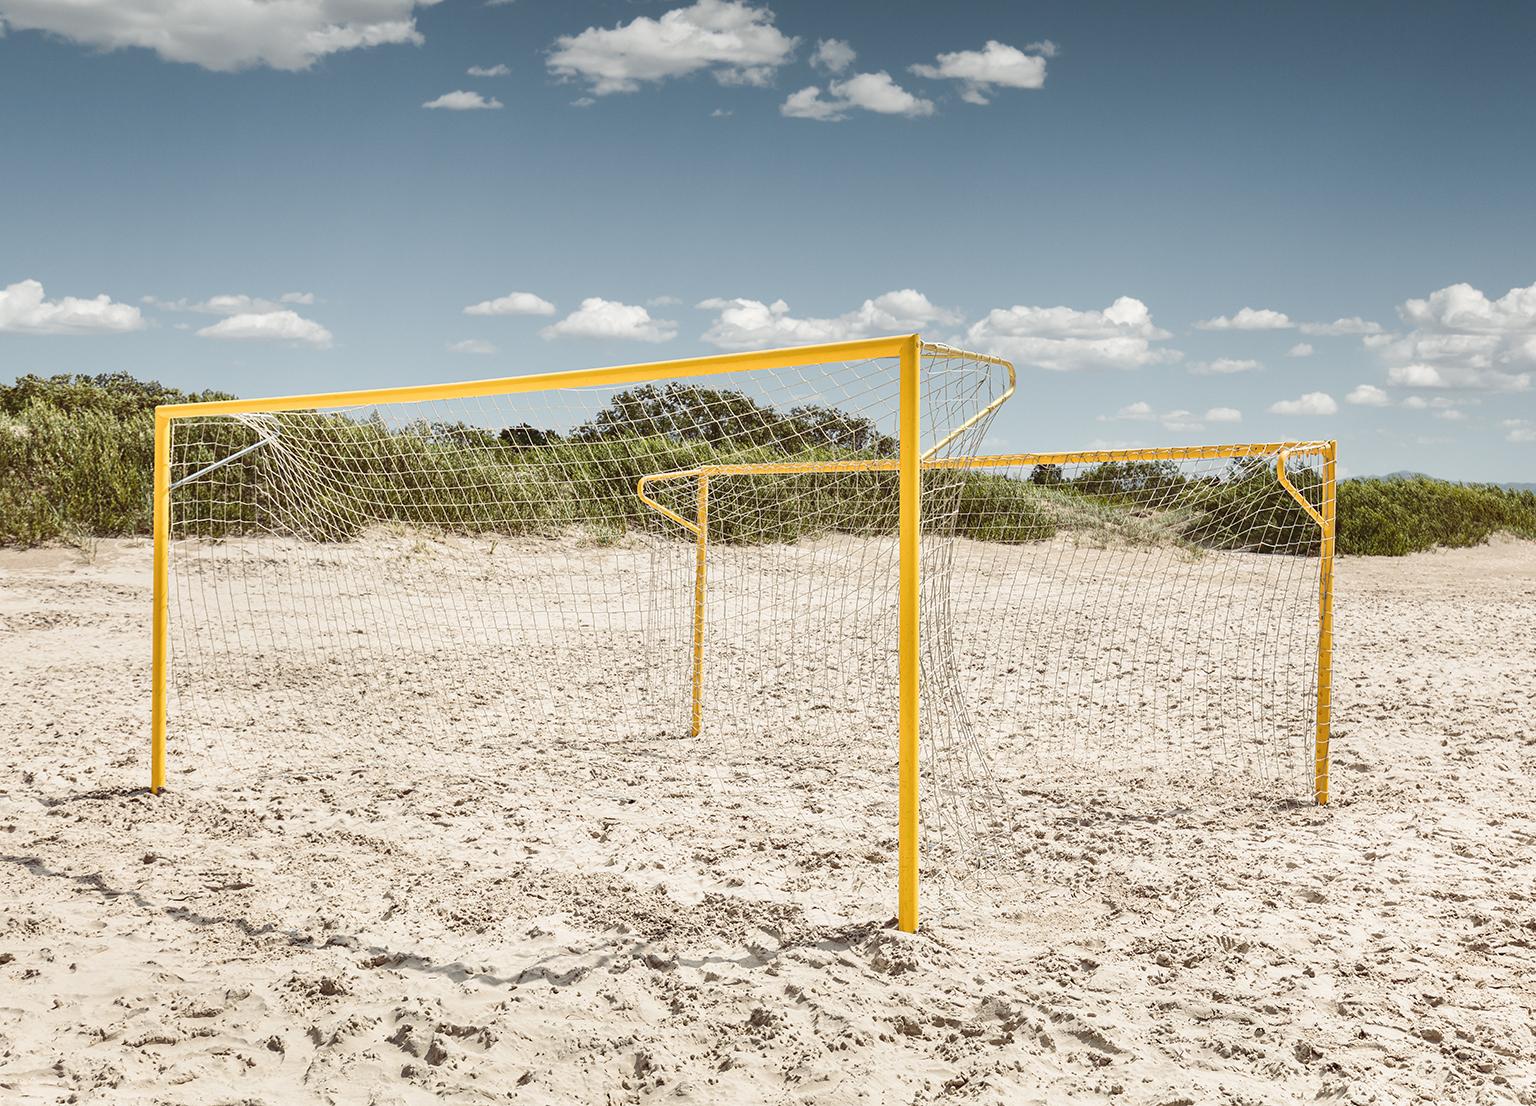 Beach Goals - large format photograph of iconic yellow soccer goals